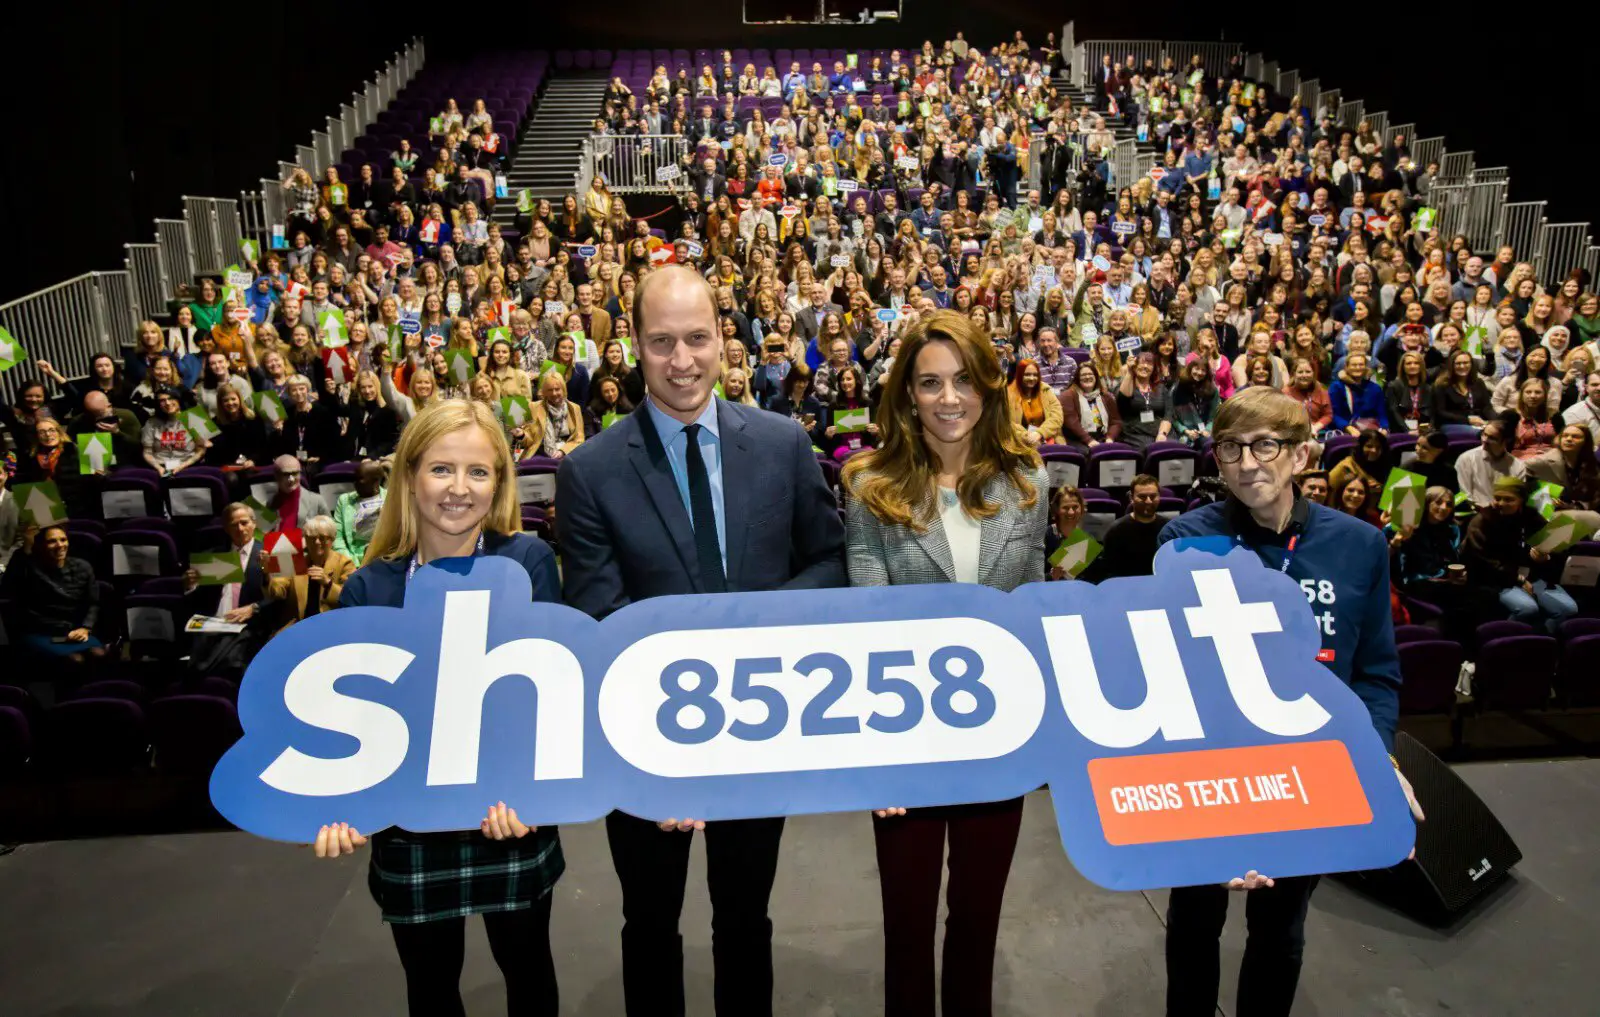 The Duke and Duchess of Cambridge attended the Shout UK volunteer celebration